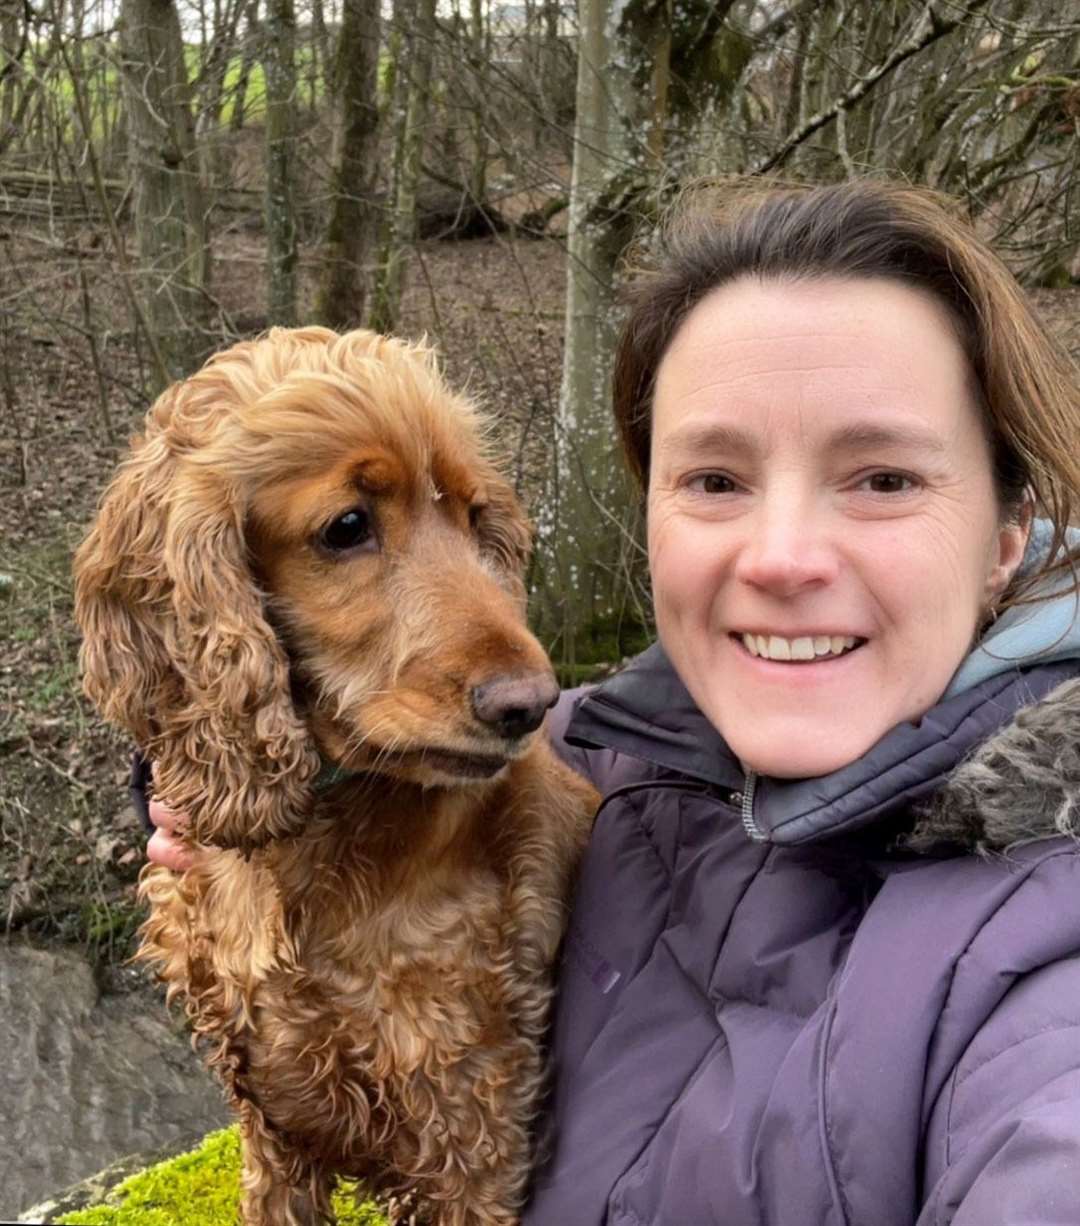 Catriona Gray (and Arlo) who walks down The Kiltwalk to raise money for Quarriers Young Carers Support Service in Aberdeenshire, which has helped her daughter in her caring role for her younger brother